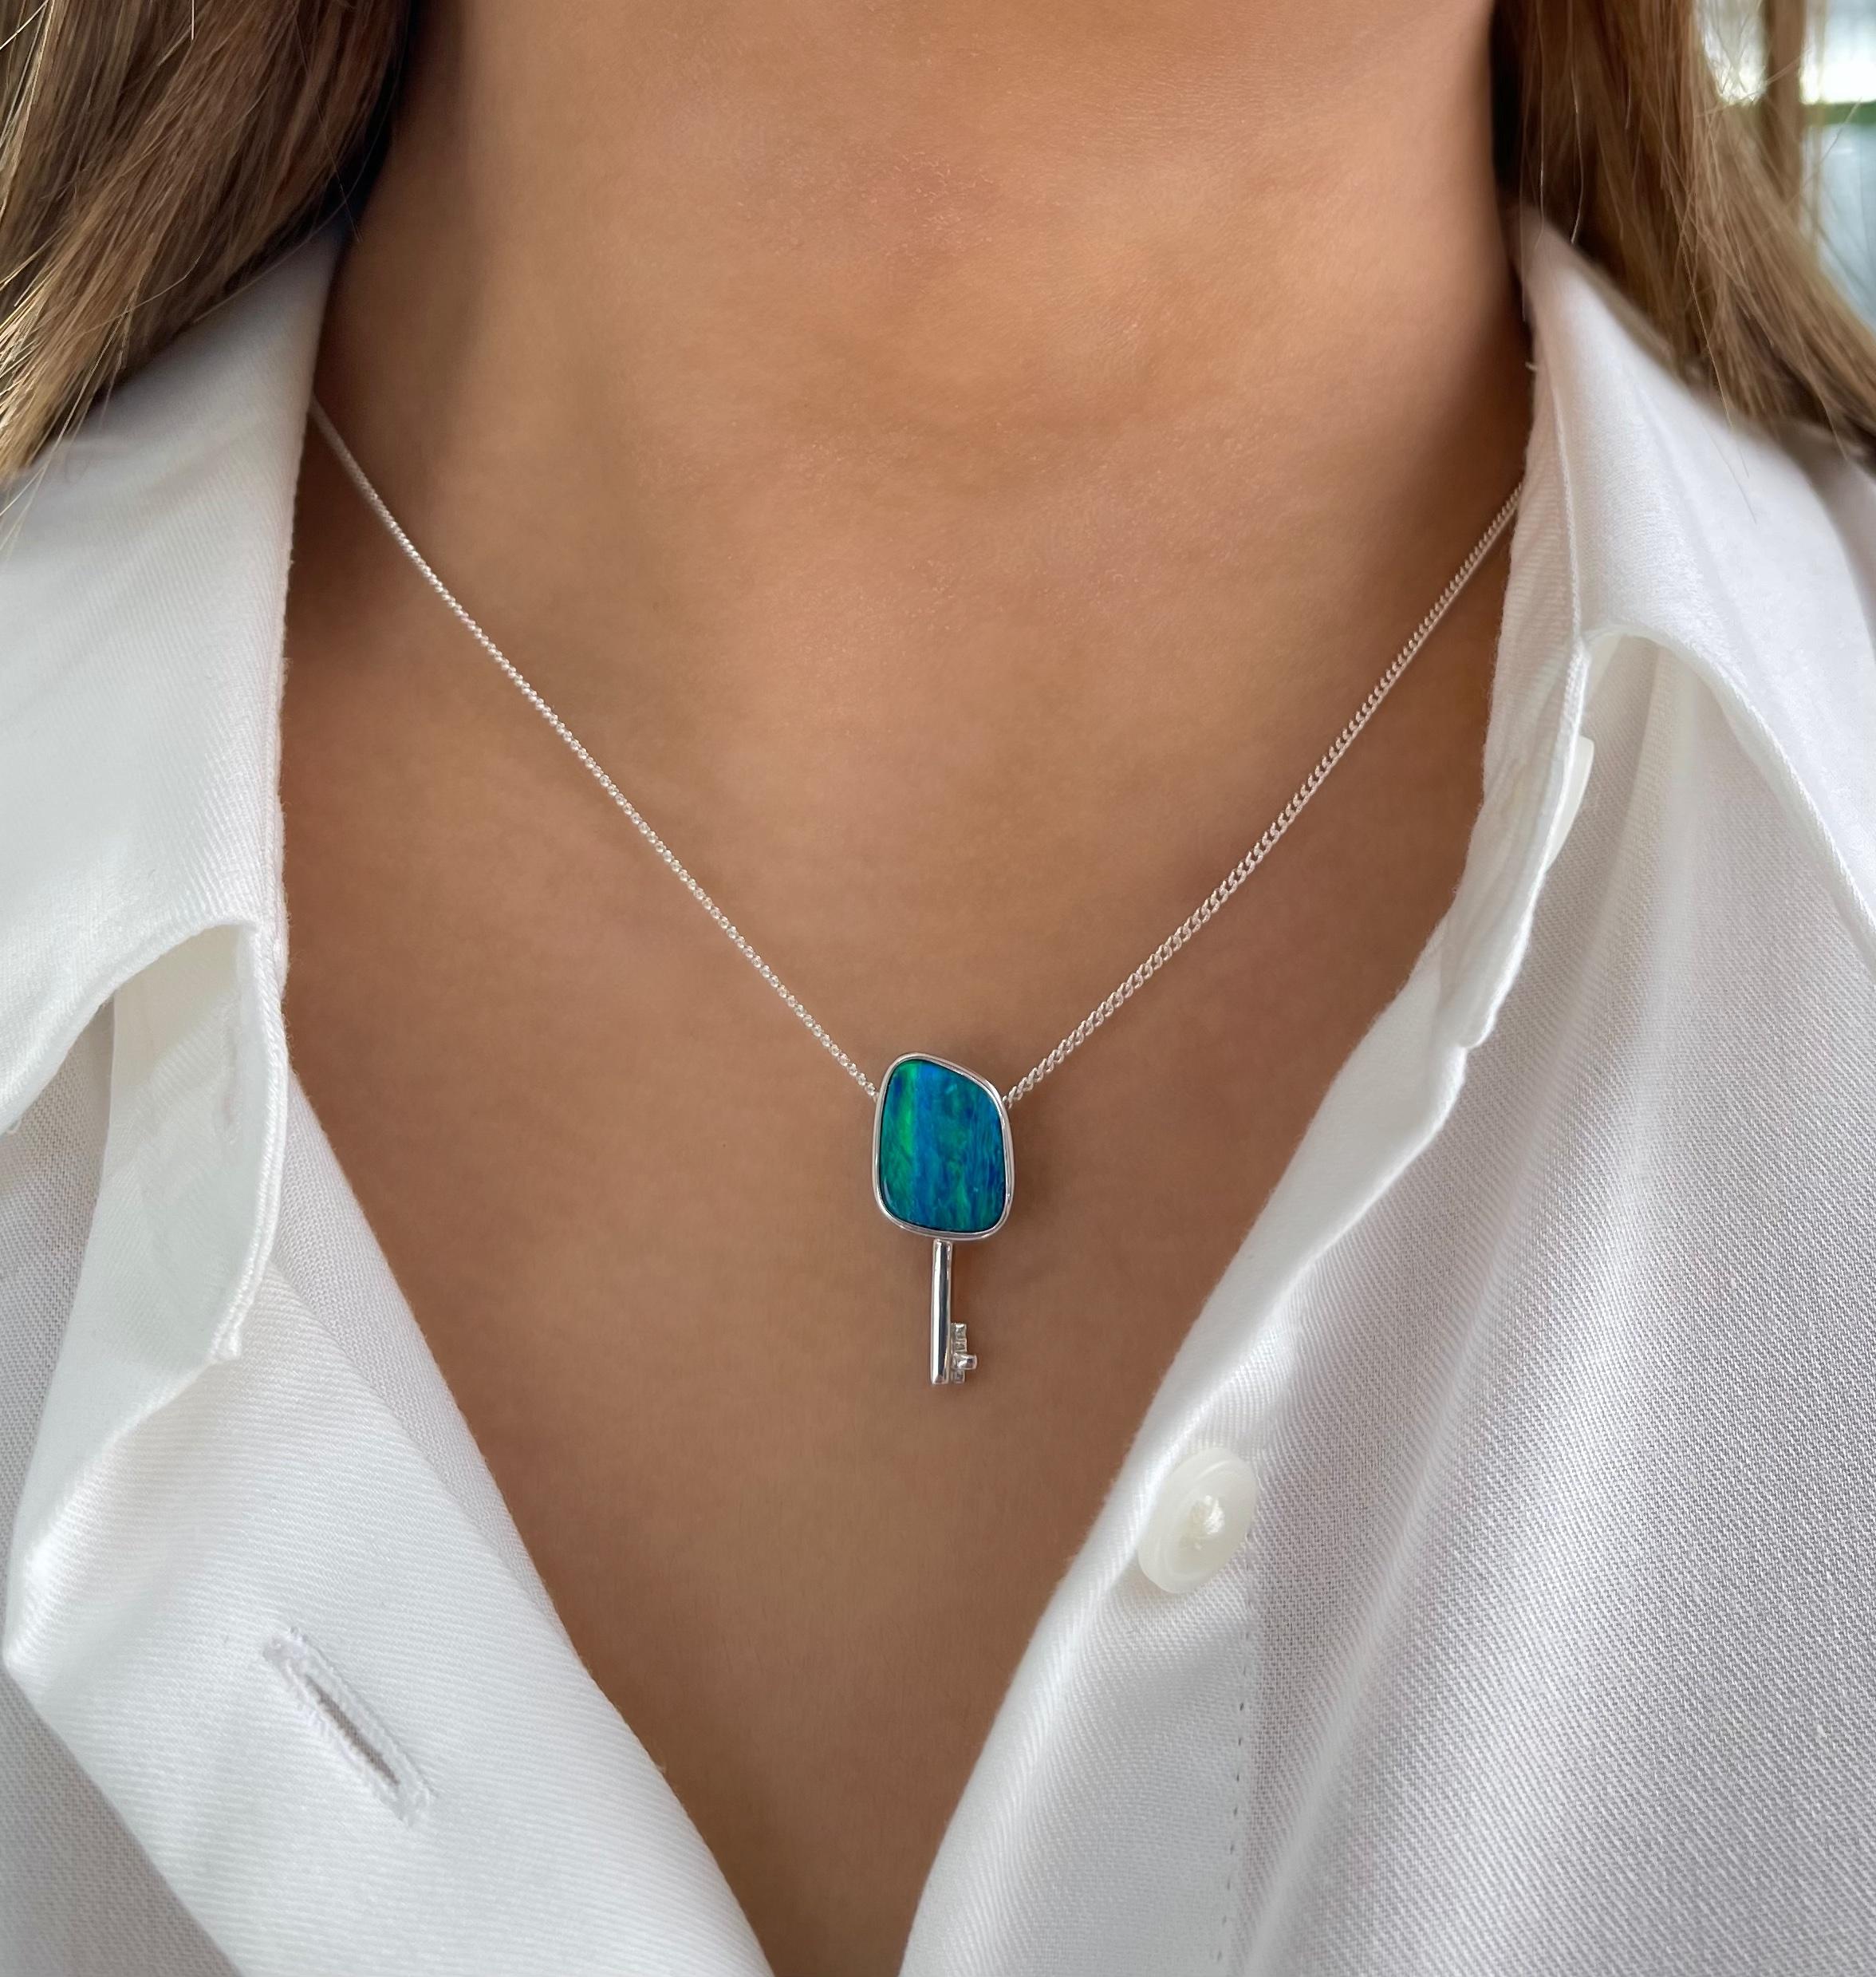 Graceful and alluring is the wearer of the 'key to your heart’ opal pendant, featuring a premium quality Australian opal doublet (3.44ct) sourced from Coober Pedy, Australia. Set in our elegant sterling silver, this stunning and sophisticated opal